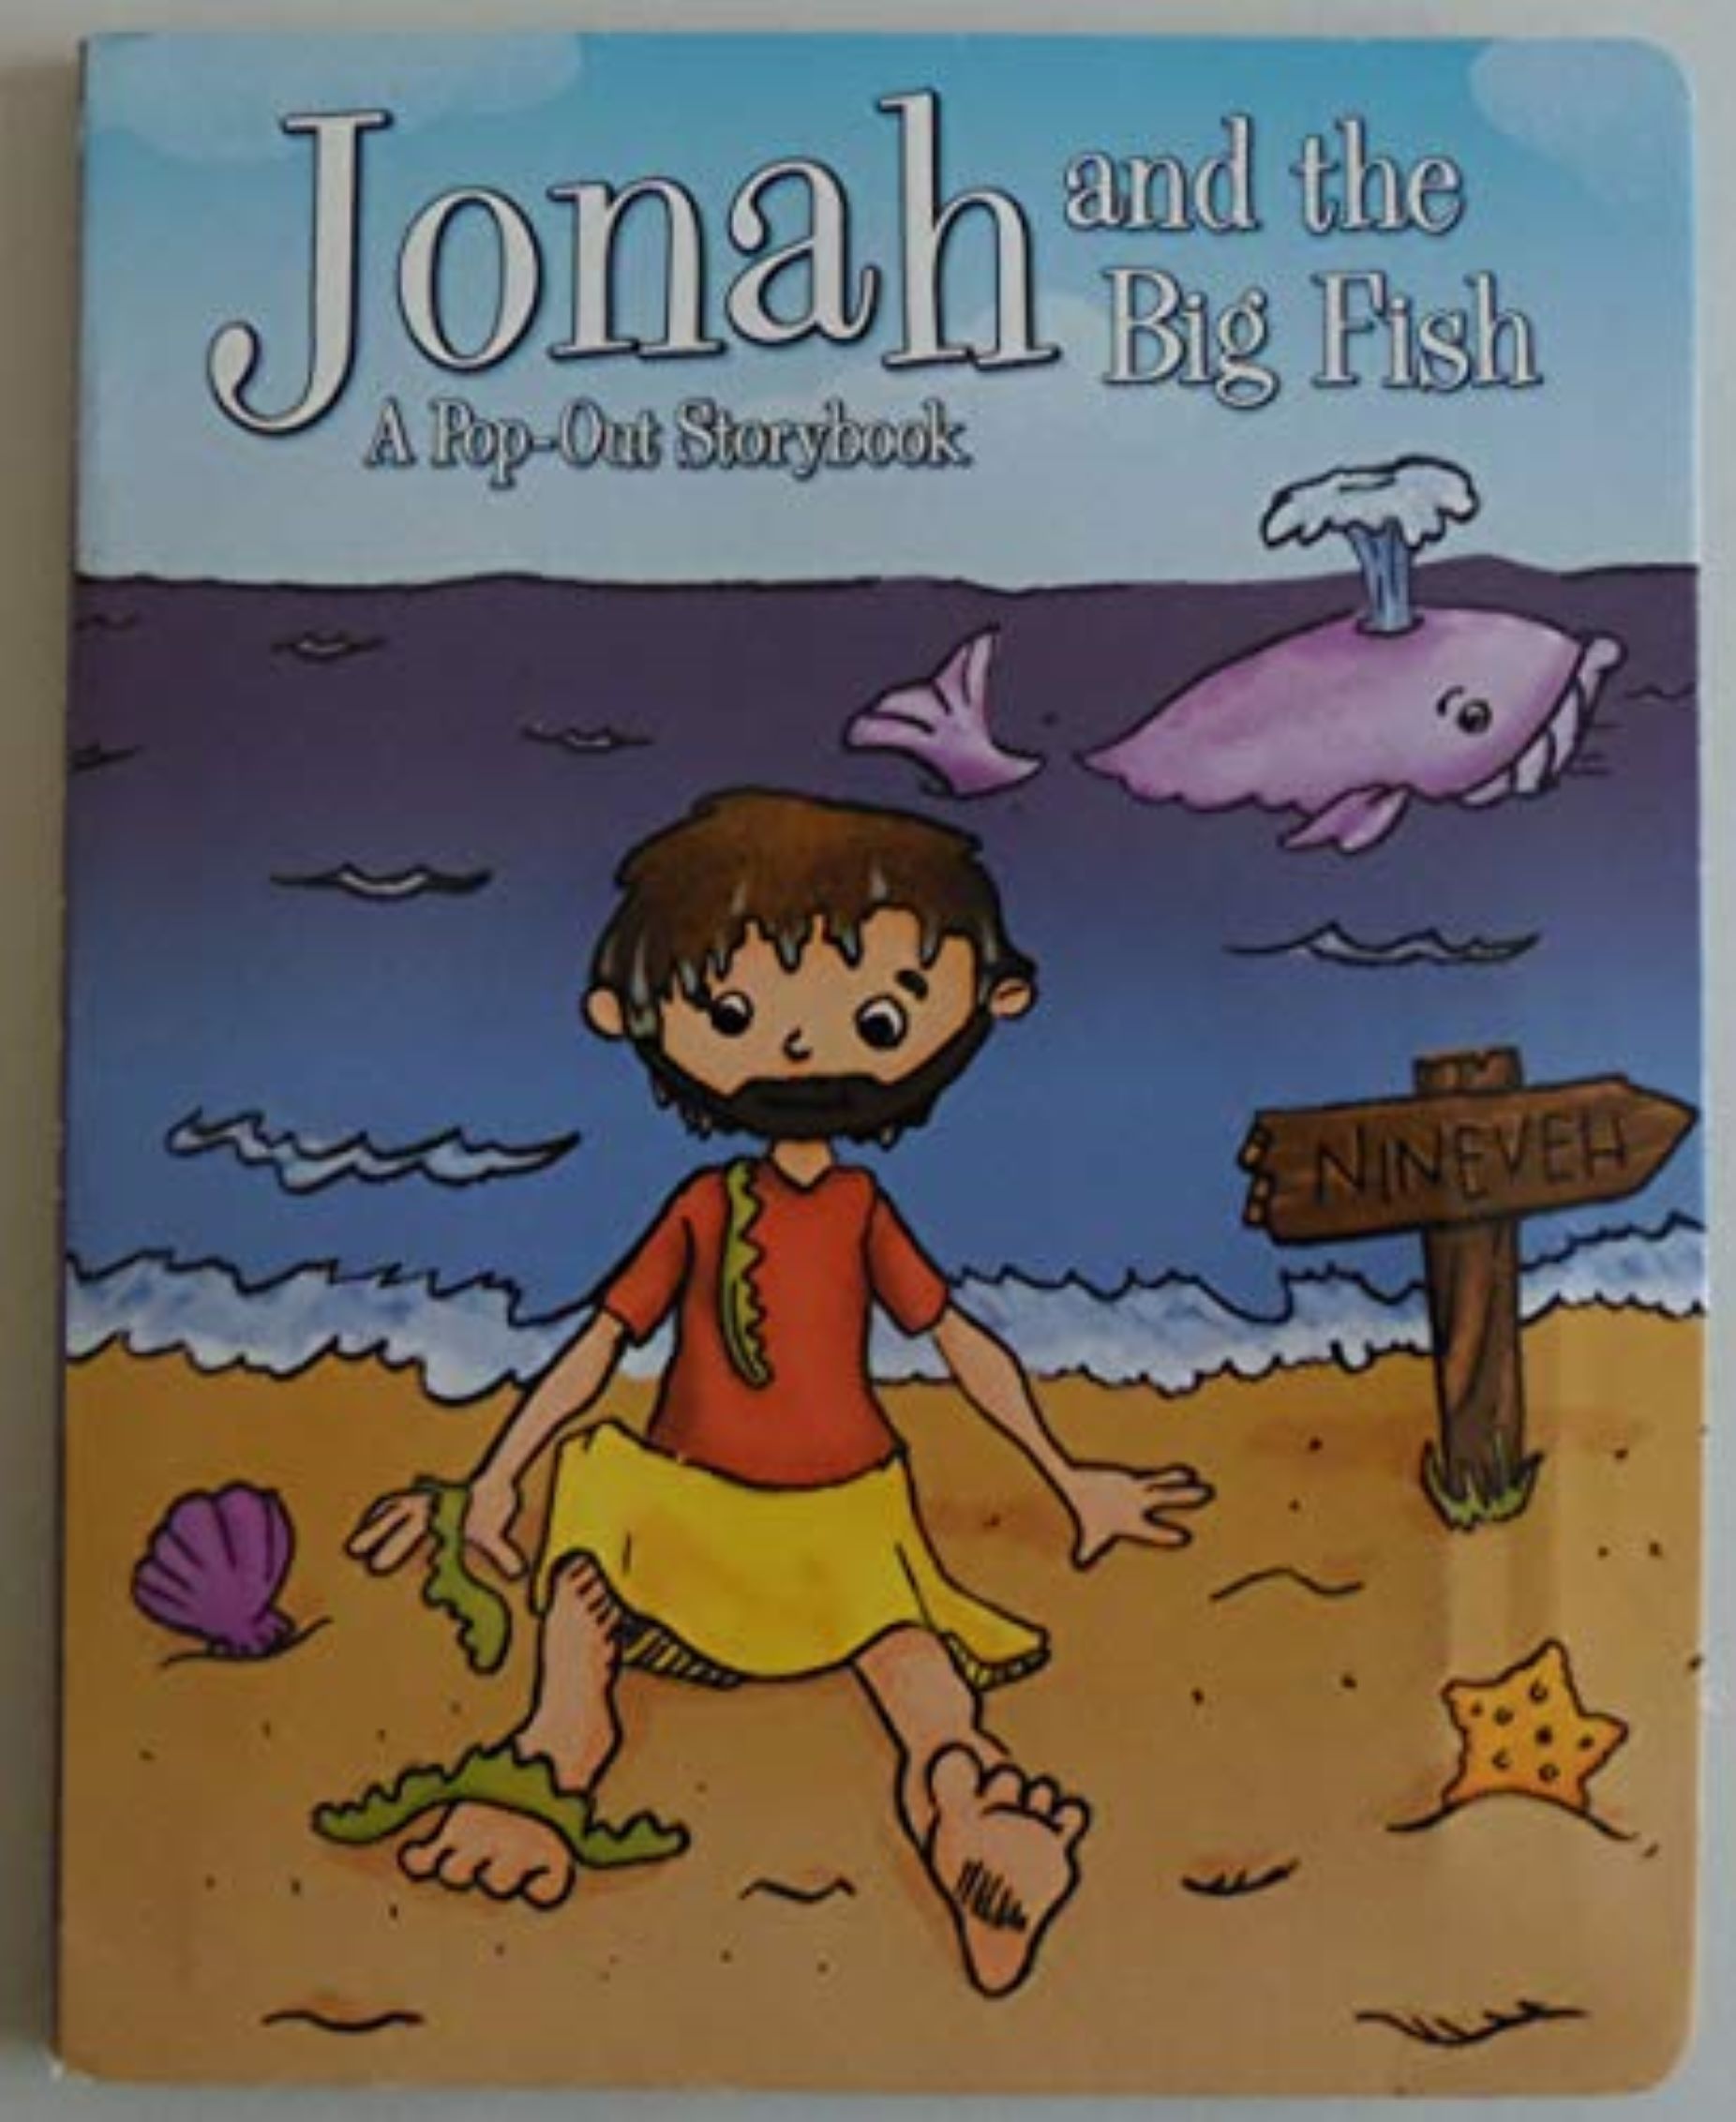 Jonah and the Big Fish A Pop-Out Storybook